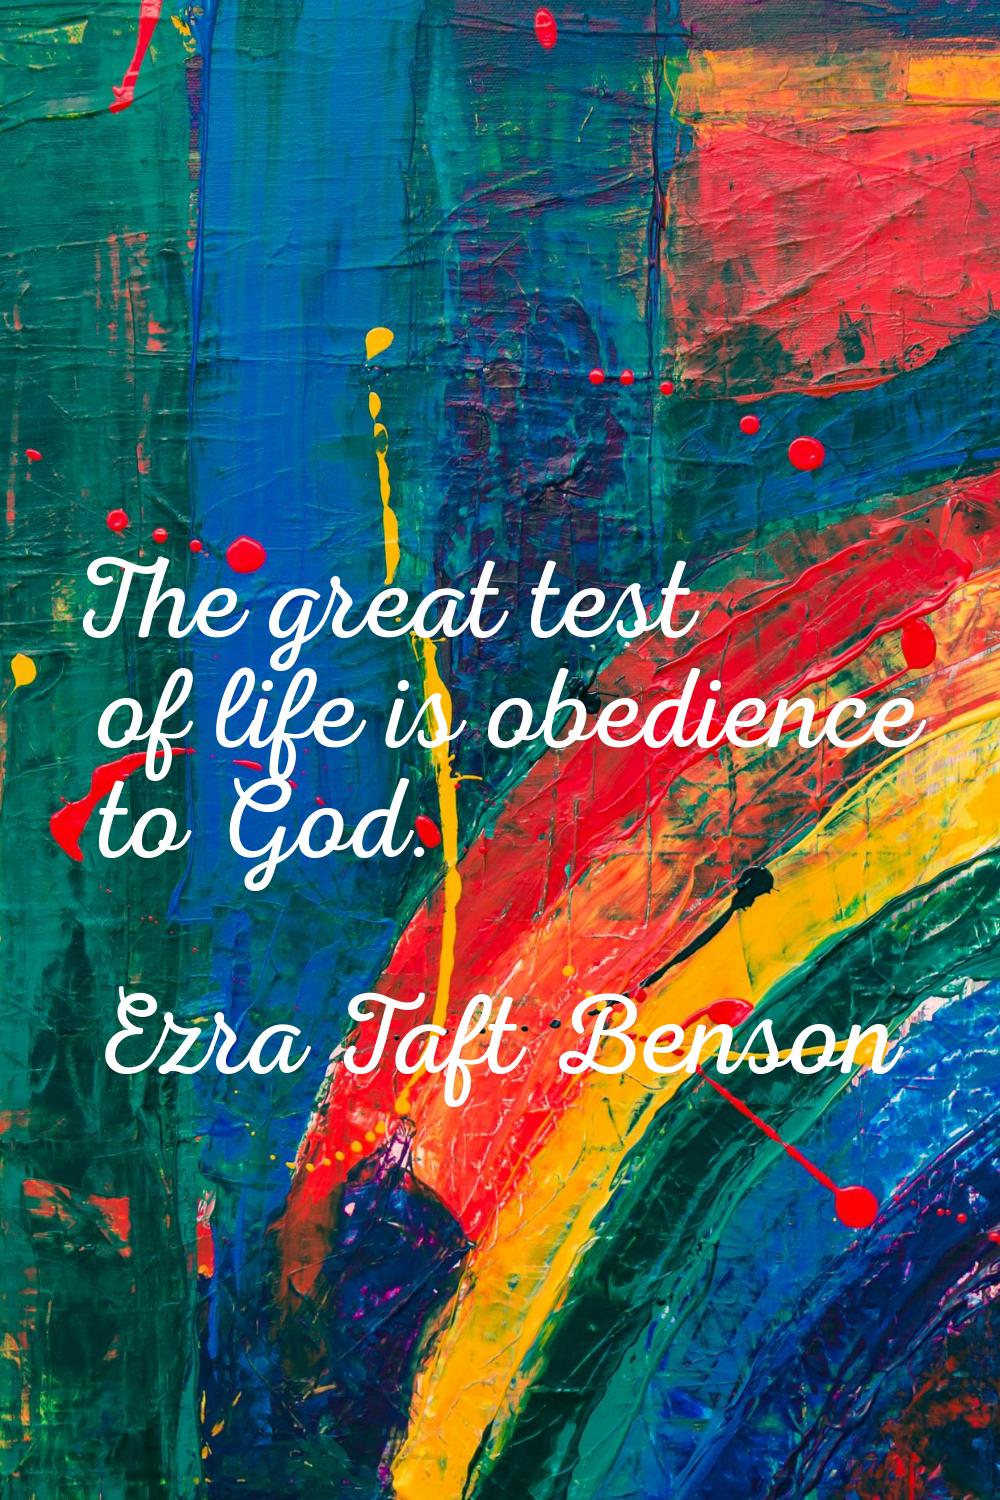 The great test of life is obedience to God.